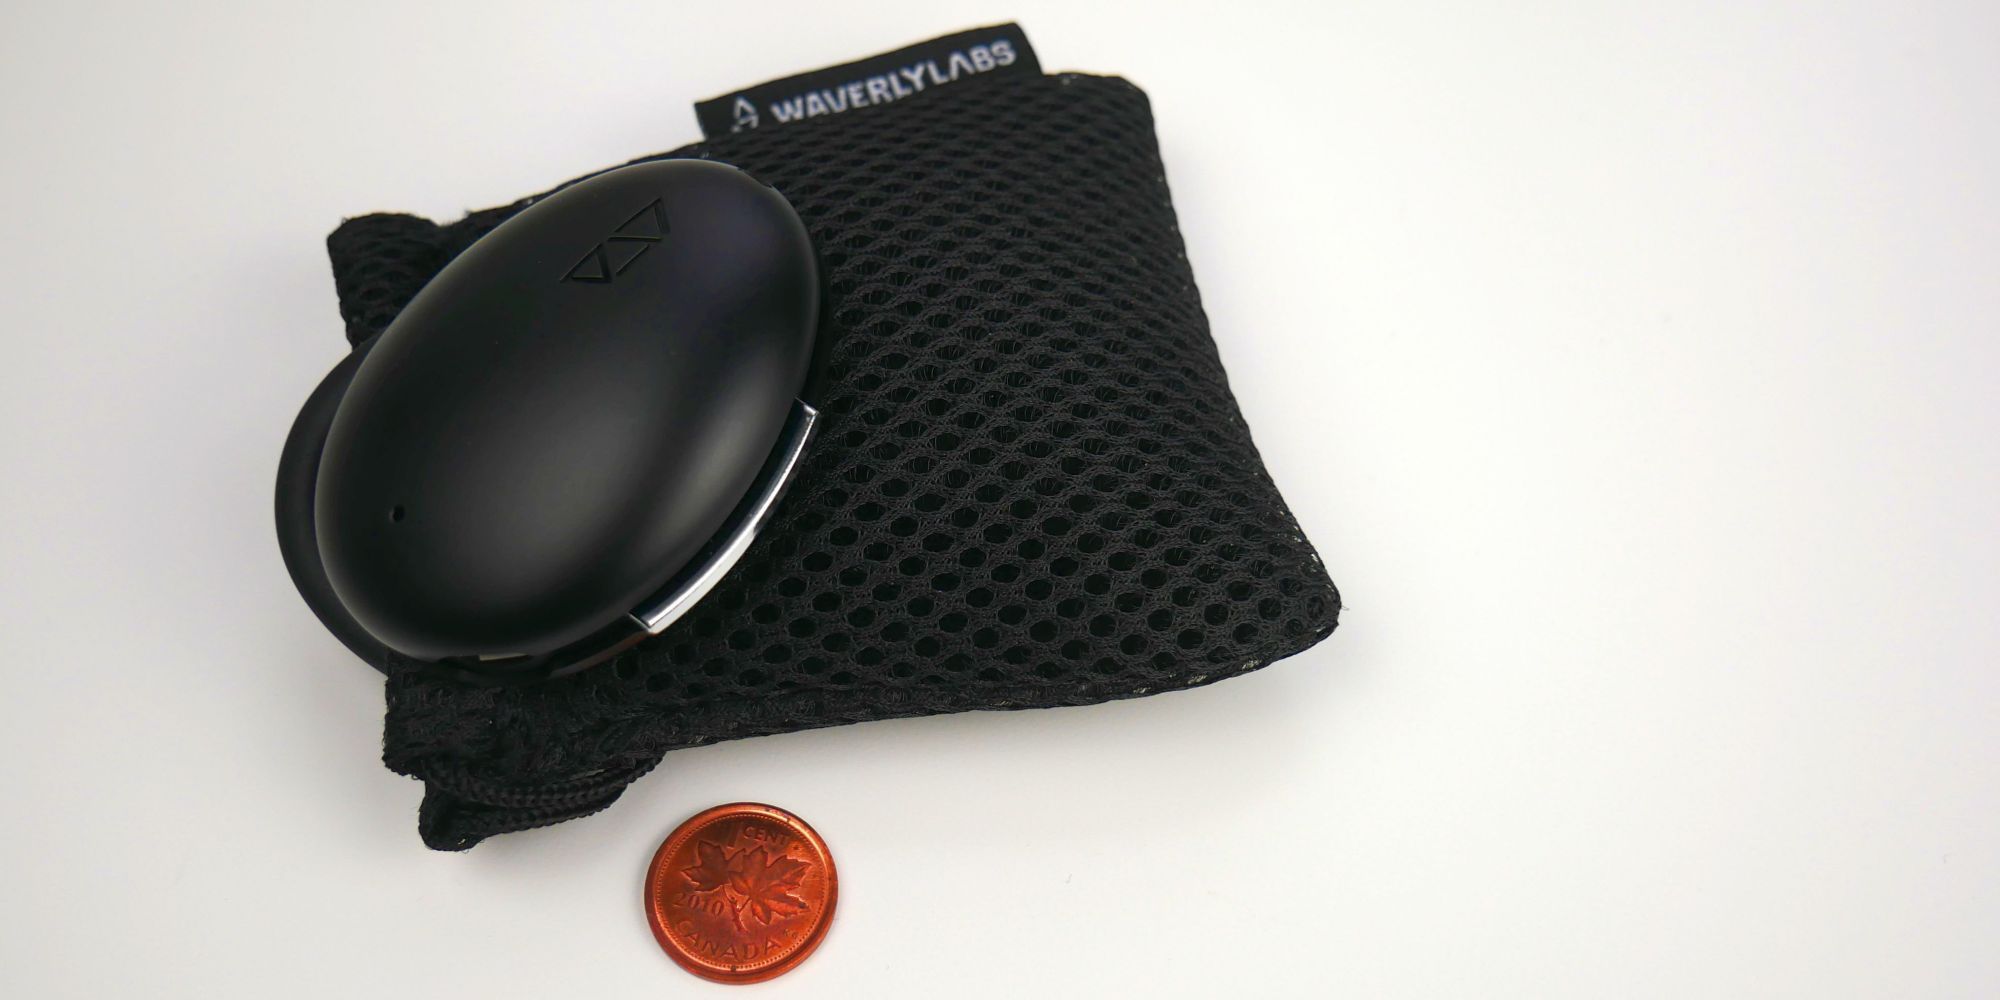 Waverly Labs Ambassador Interpreter earpiece with pouch and penny for scale